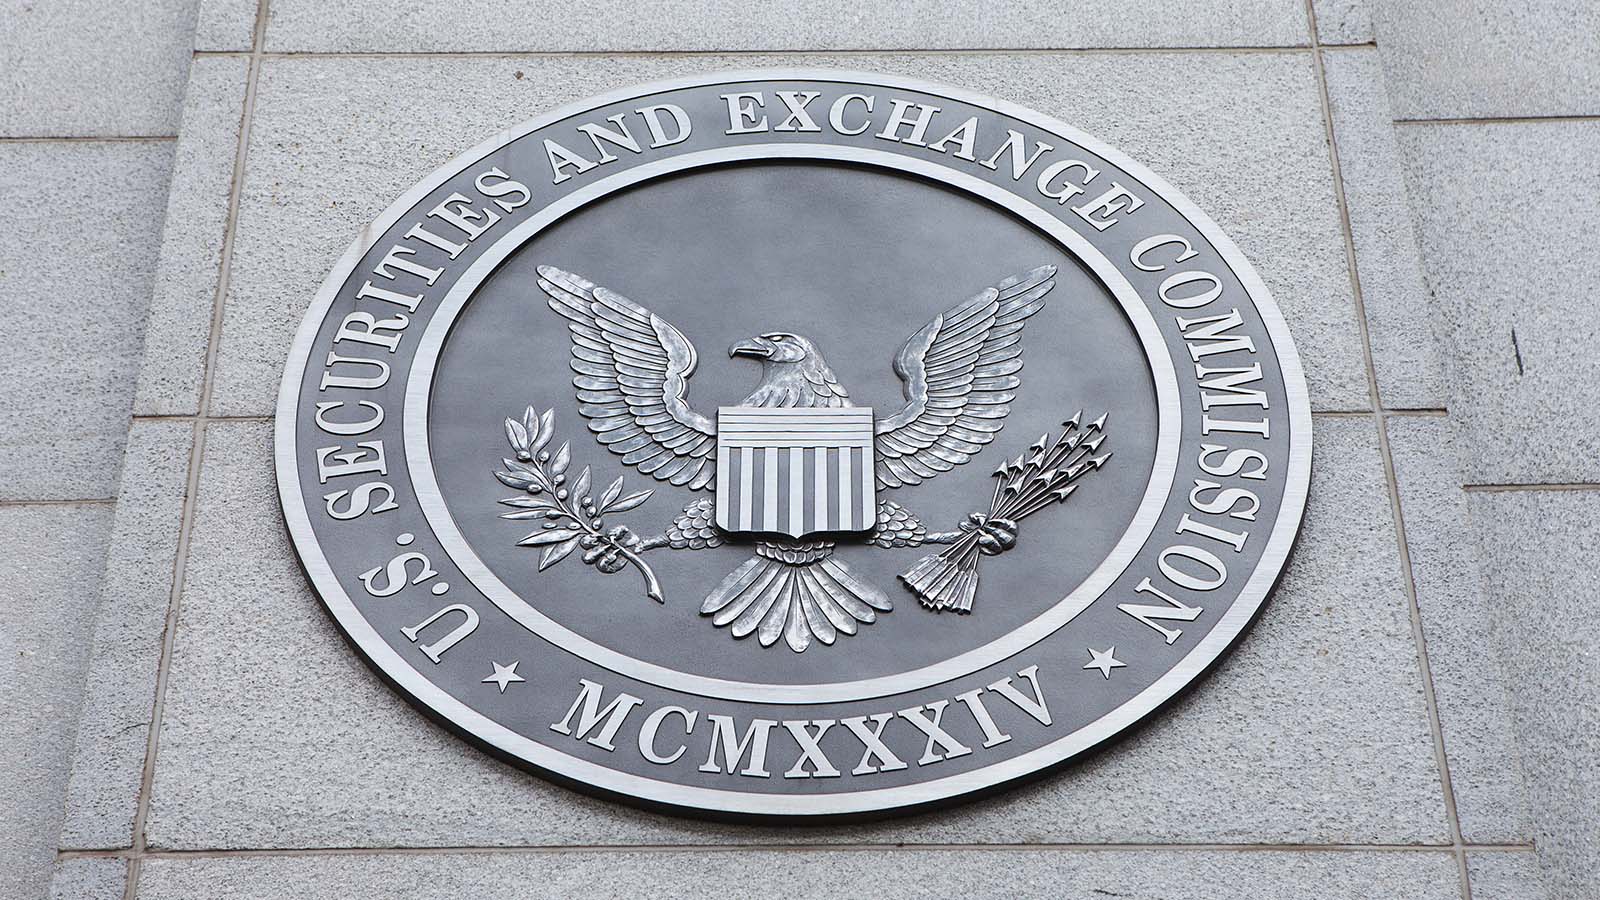 An emblem of the U.S. Securities and Exchange Commission in Washington, DC.